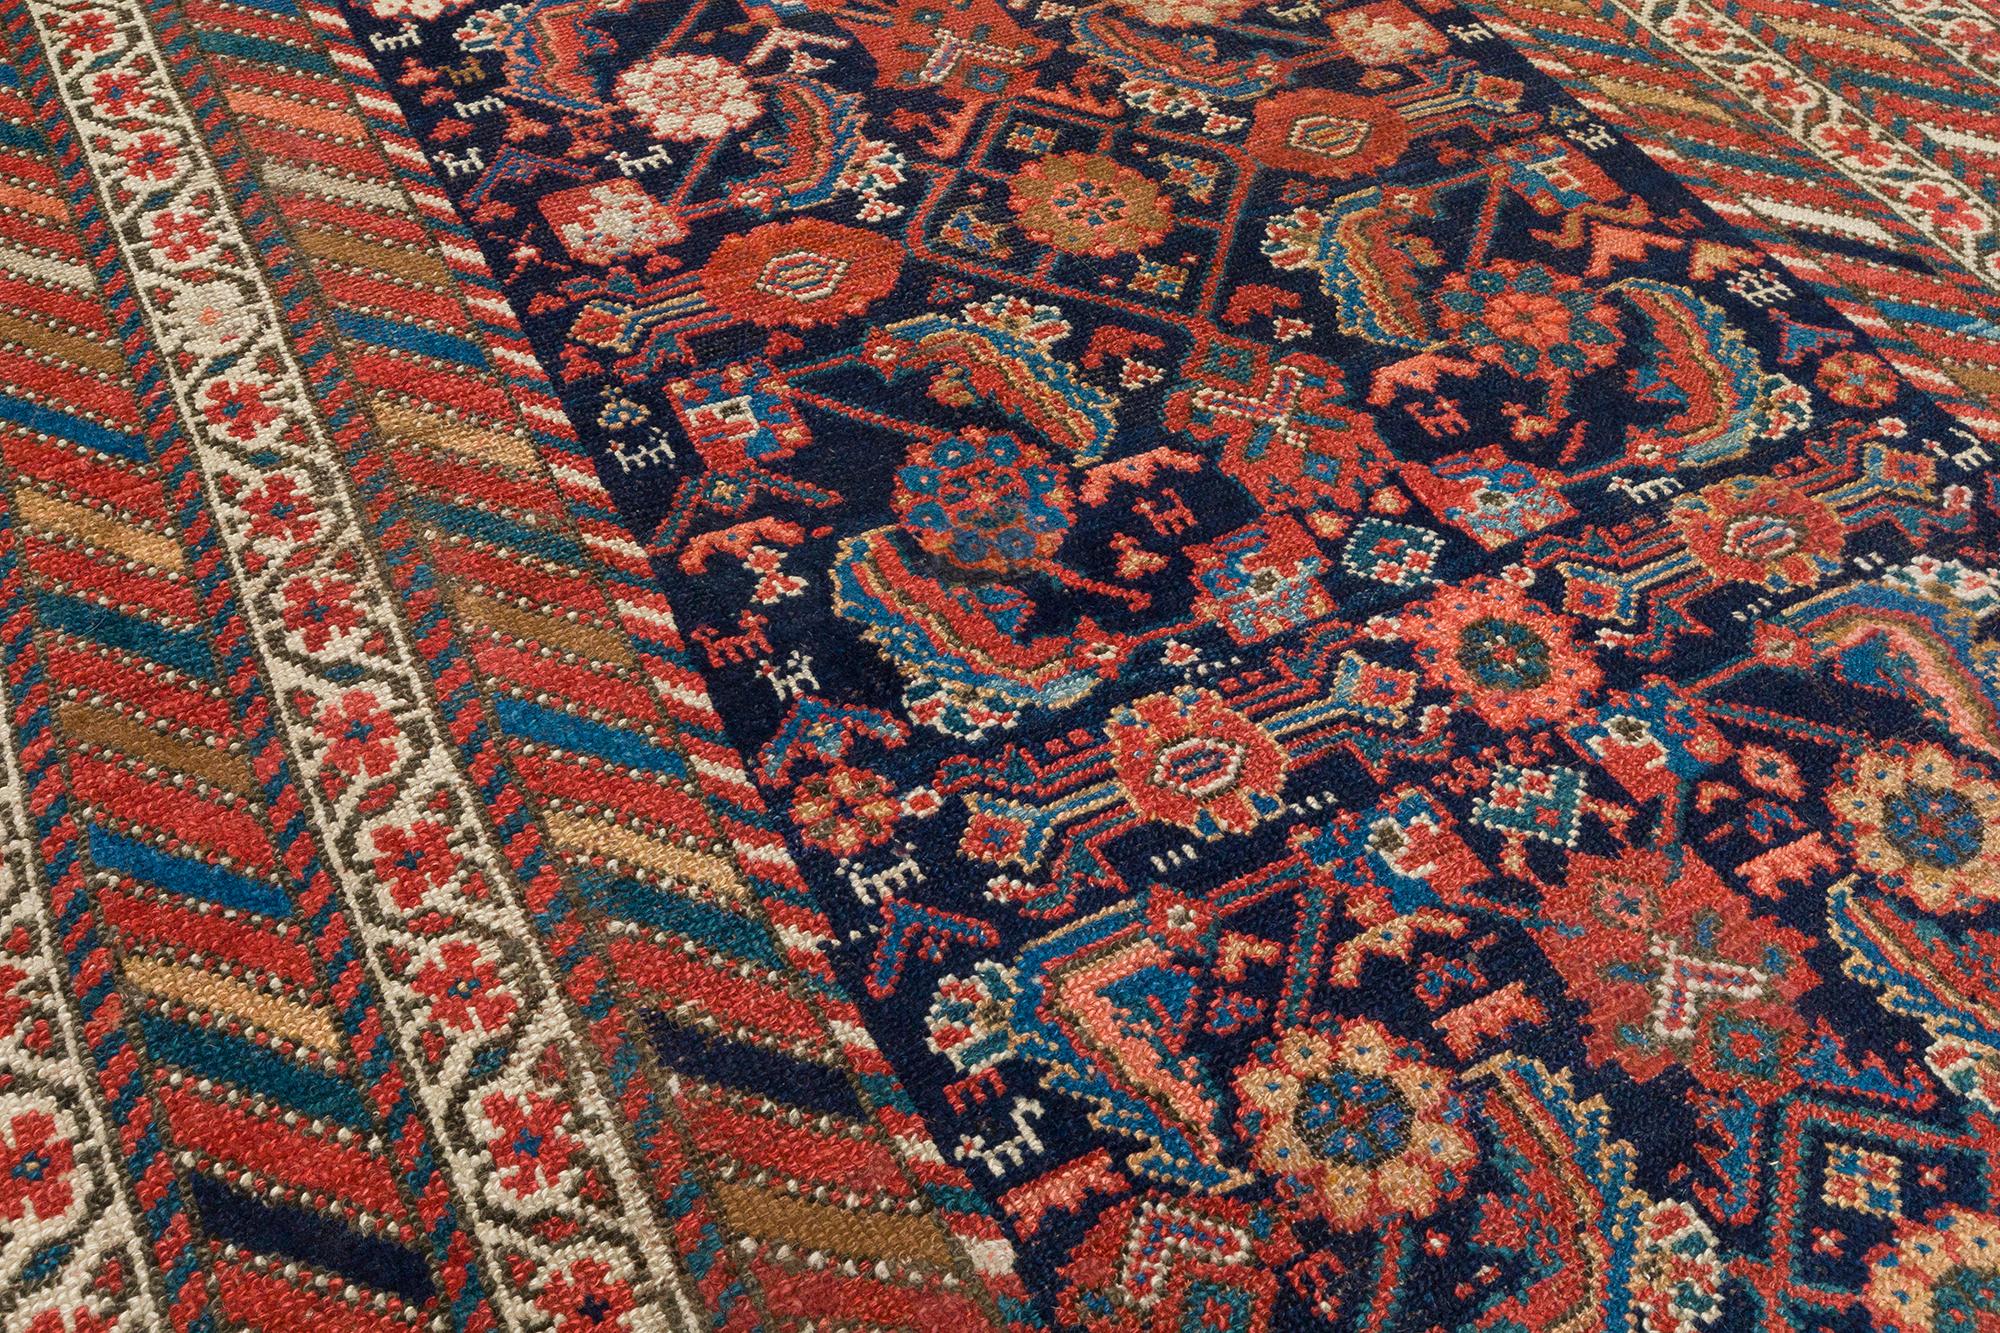 This antique Malayer rug is skillfully sourced by N A S I R I through extensive travel, passion, and research.  Malayer rugs are named after a major rug weaving village in central west Iran.  The village was known for producing extremely fine rugs